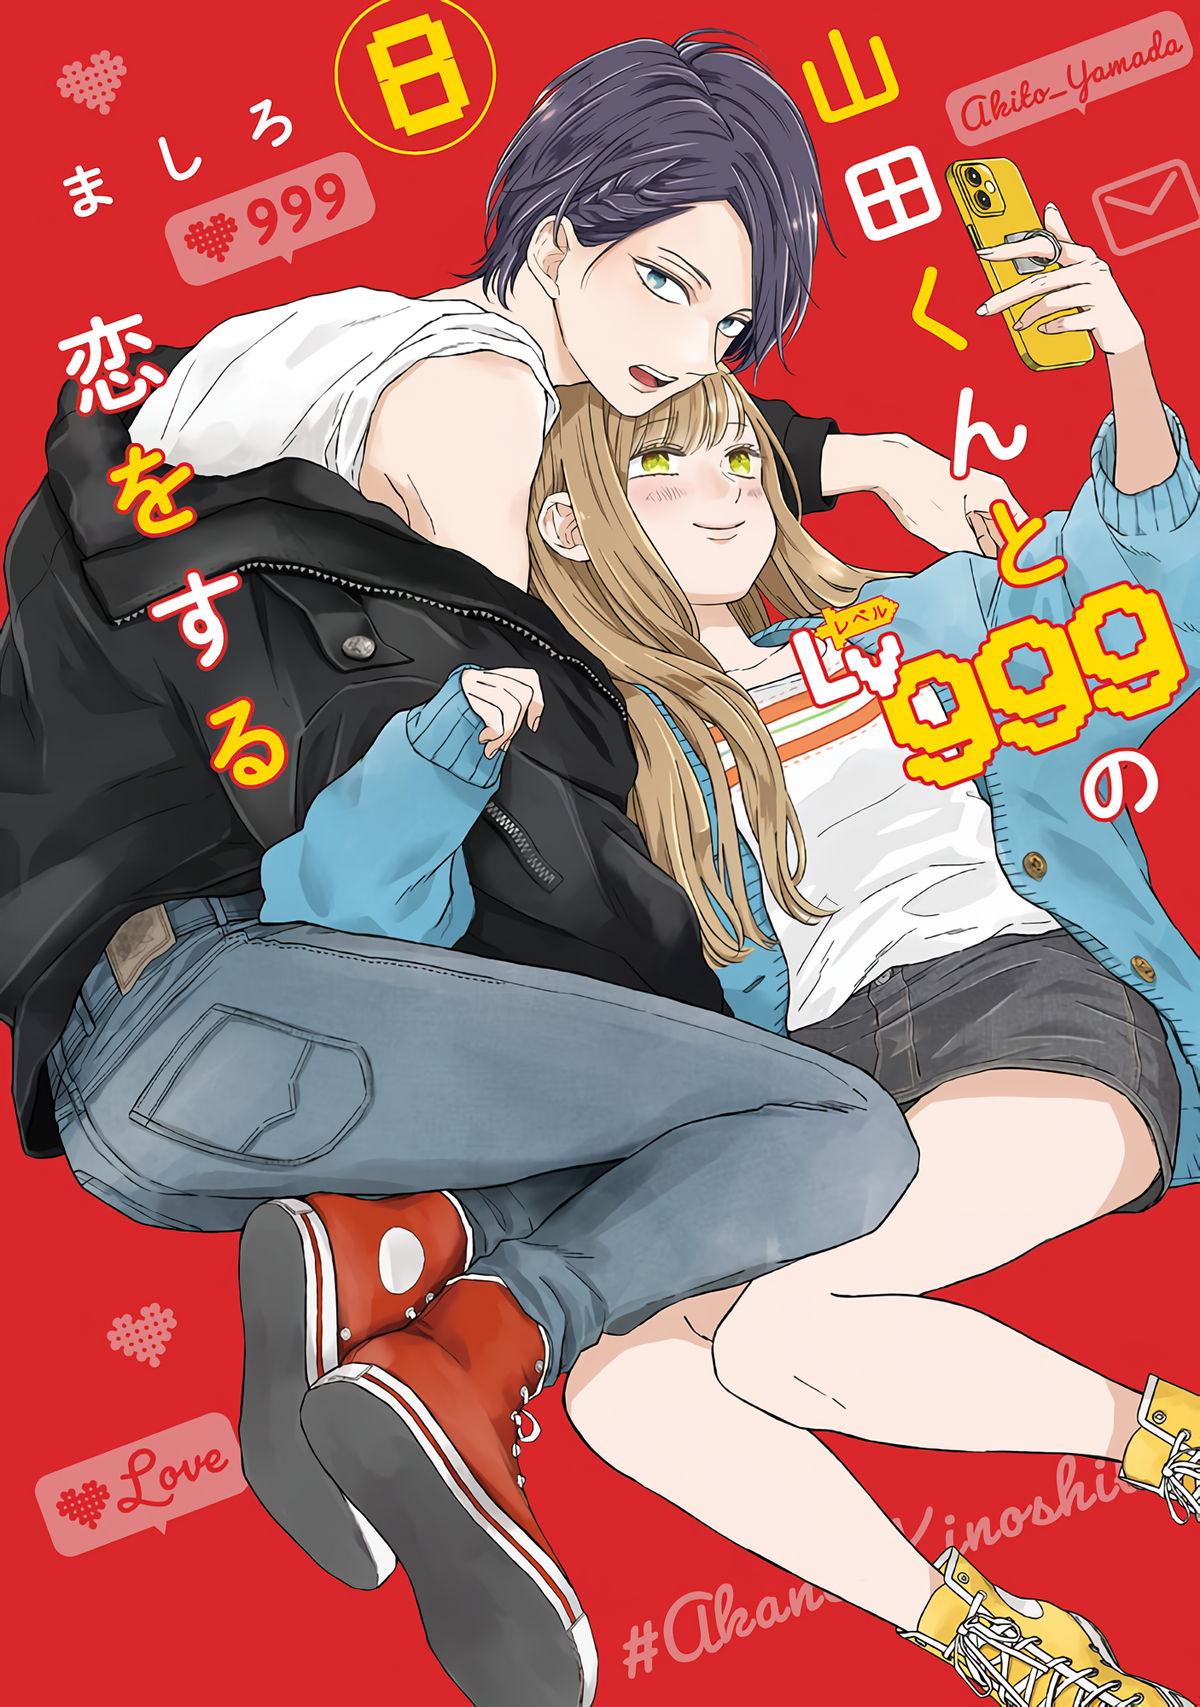 My Love Story With Yamada-kun at Lv999 - The Spring 2023 Anime Preview  Guide - Anime News Network